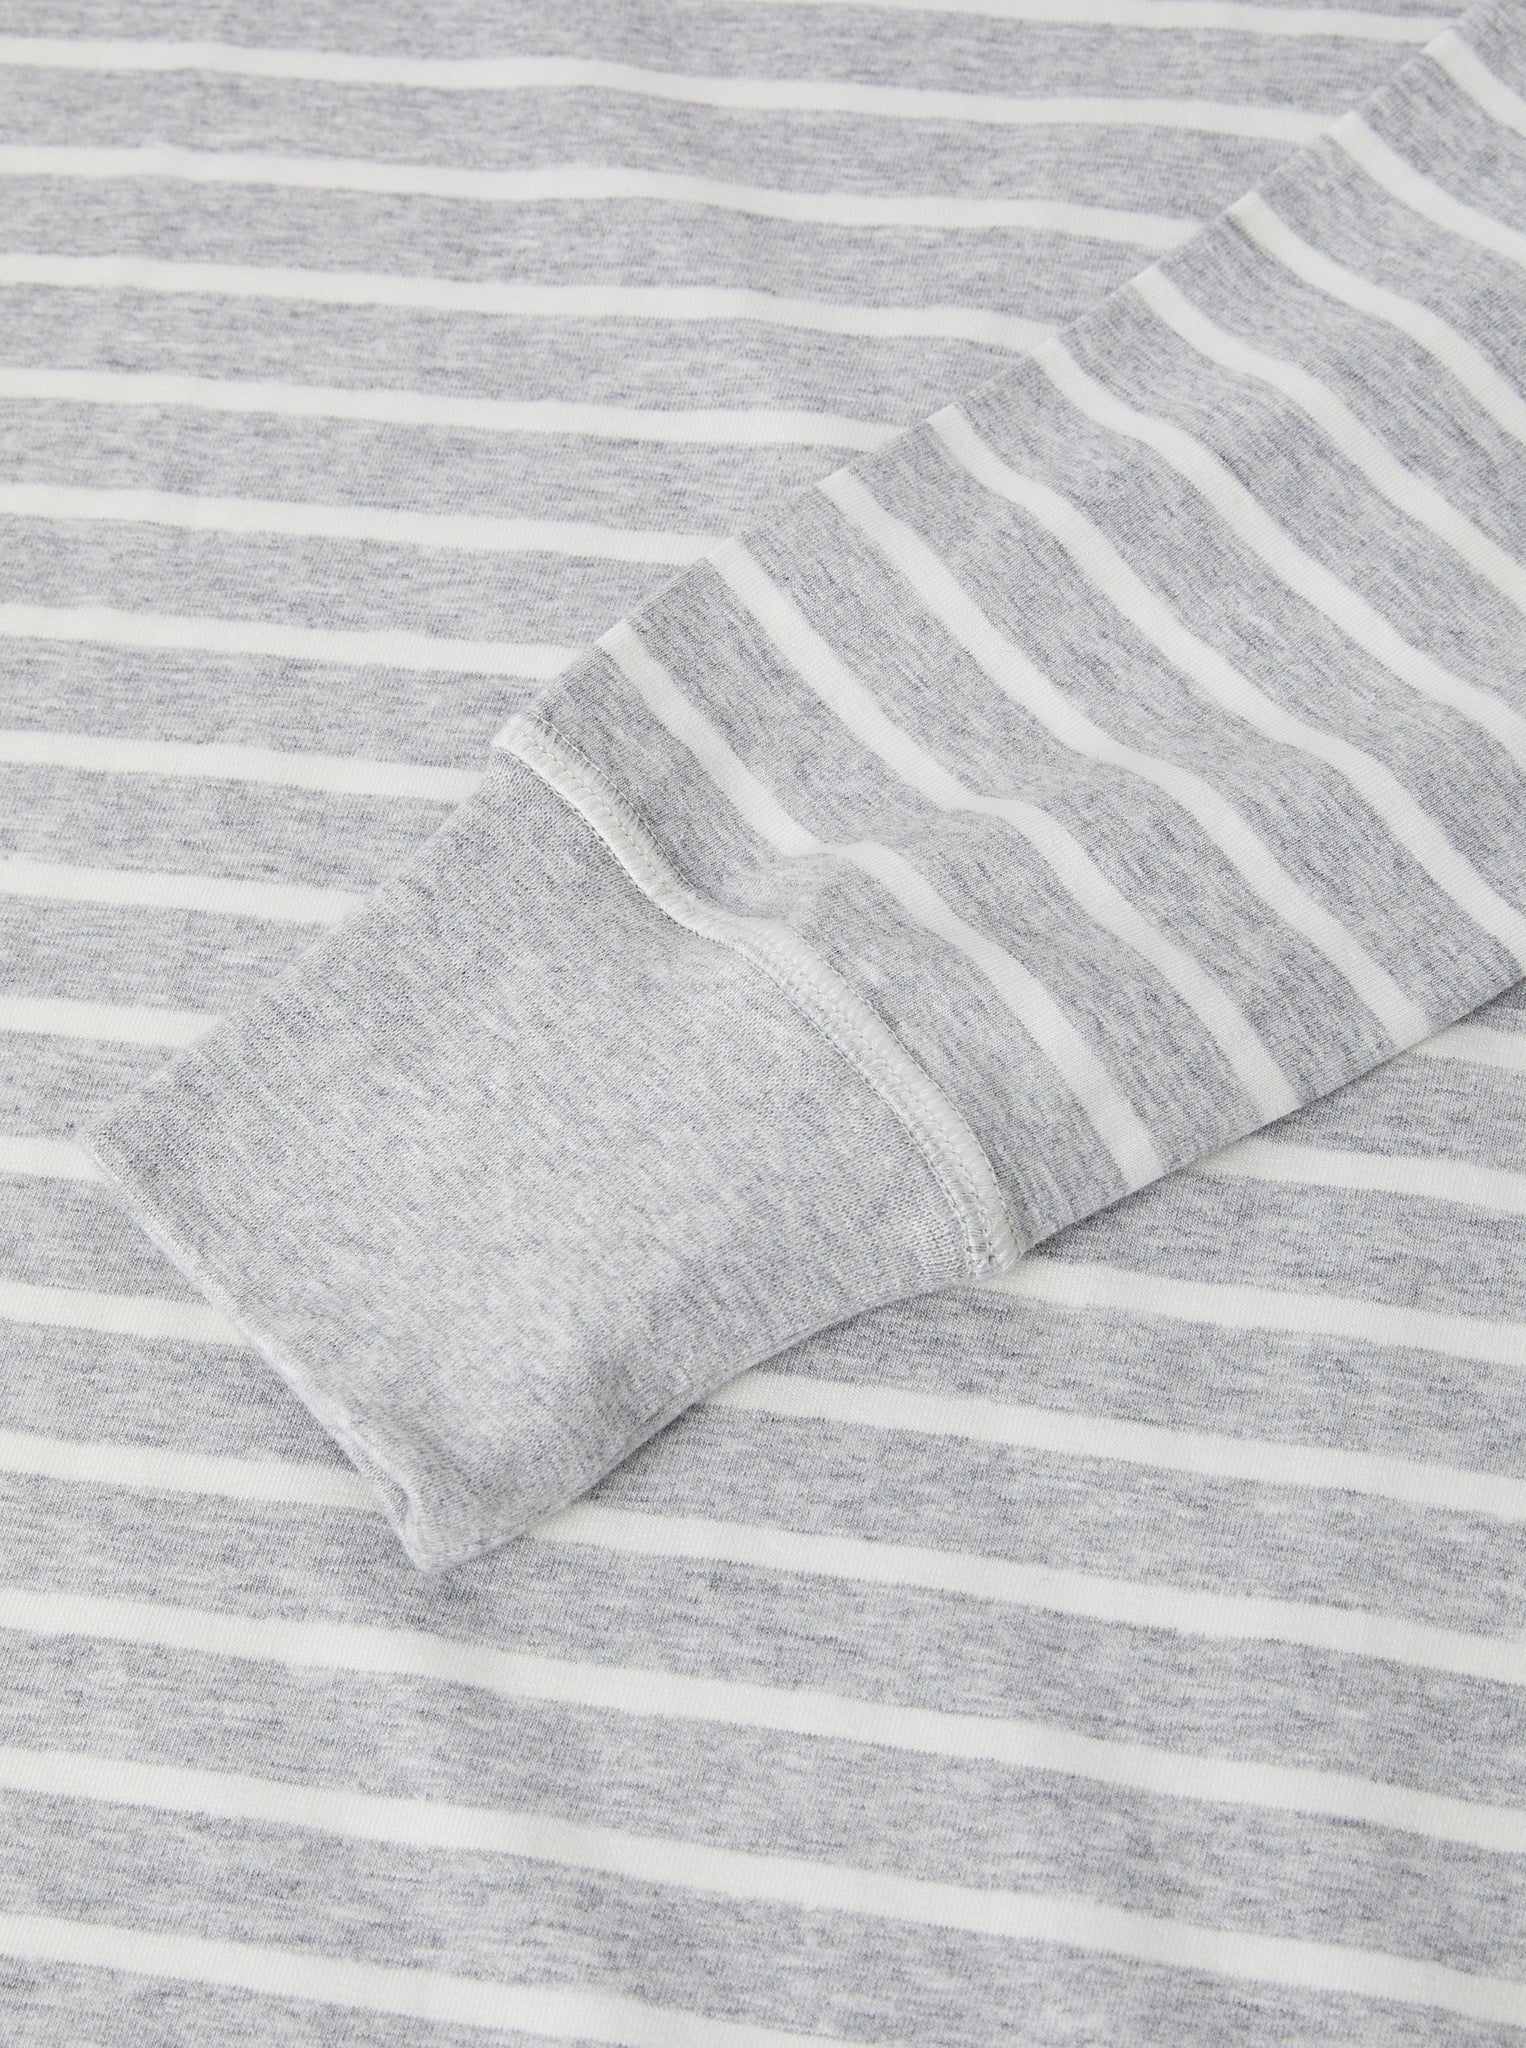 Striped Grey Adult Nightdress from the Polarn O. Pyret adult collection. Adult nightwear from sustainably sourced materials